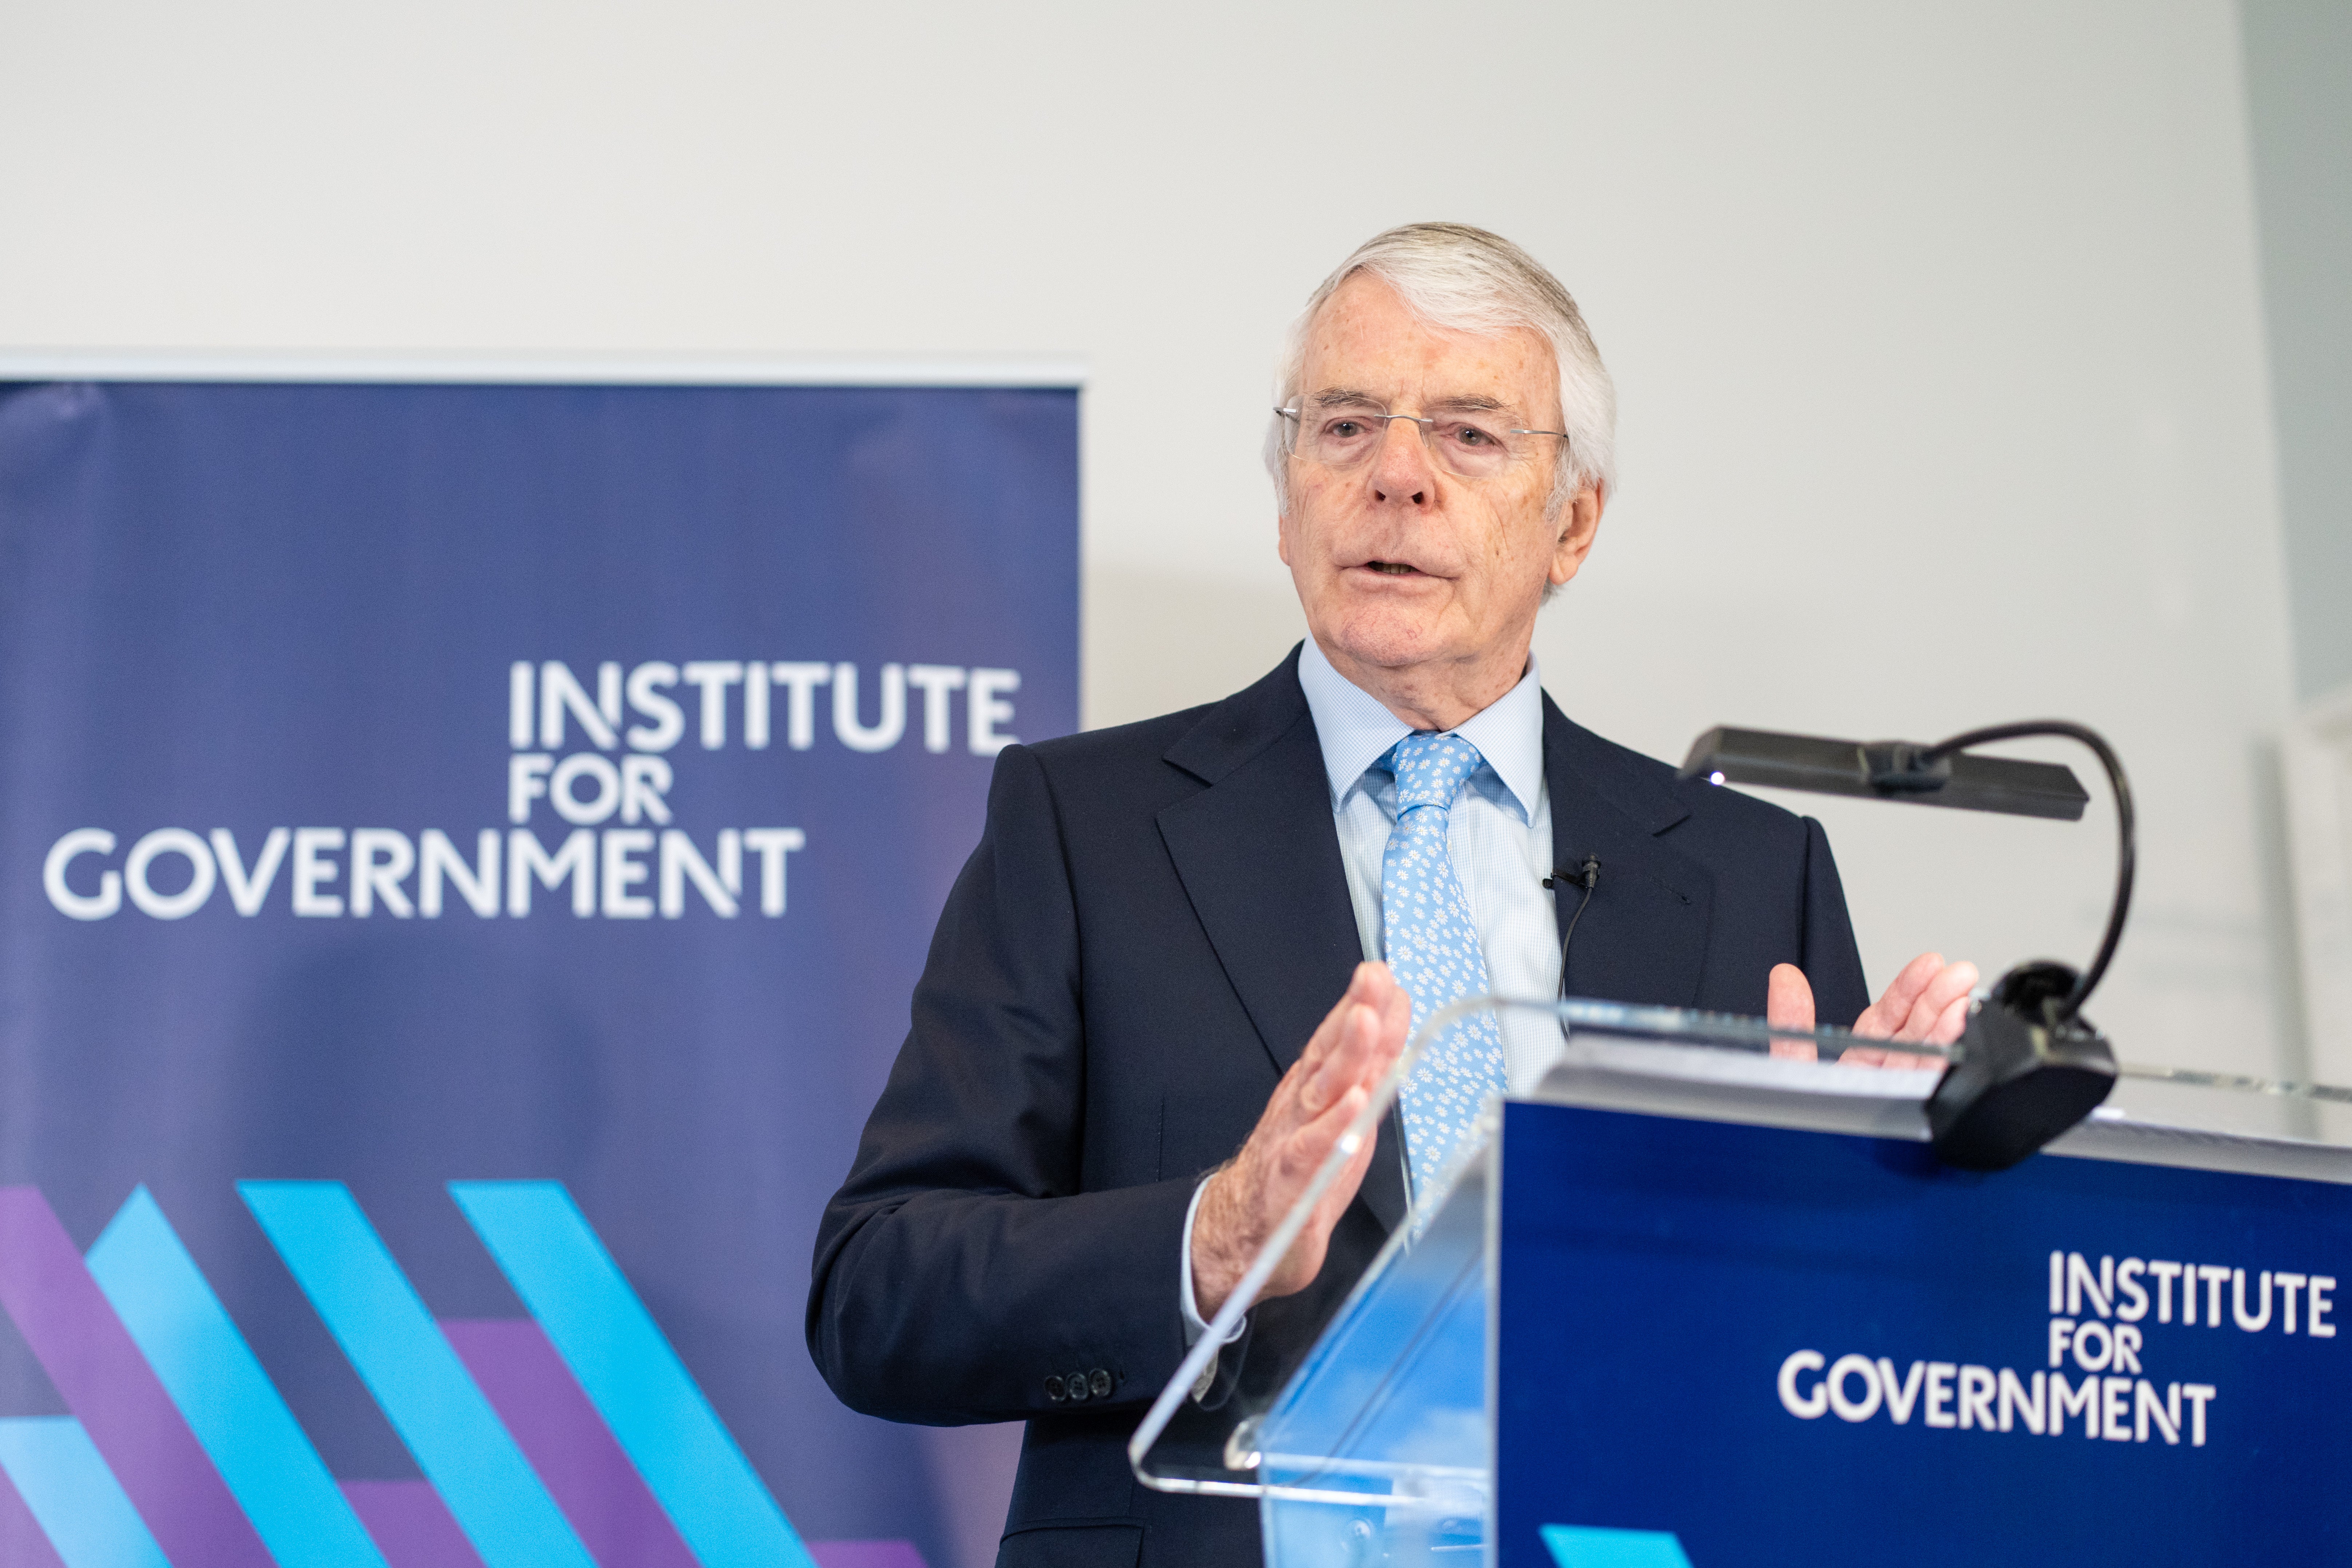 Former prime minister Sir John Major during his keynote speech at the Institute for Government this week (Dominic Lipinski/PA)